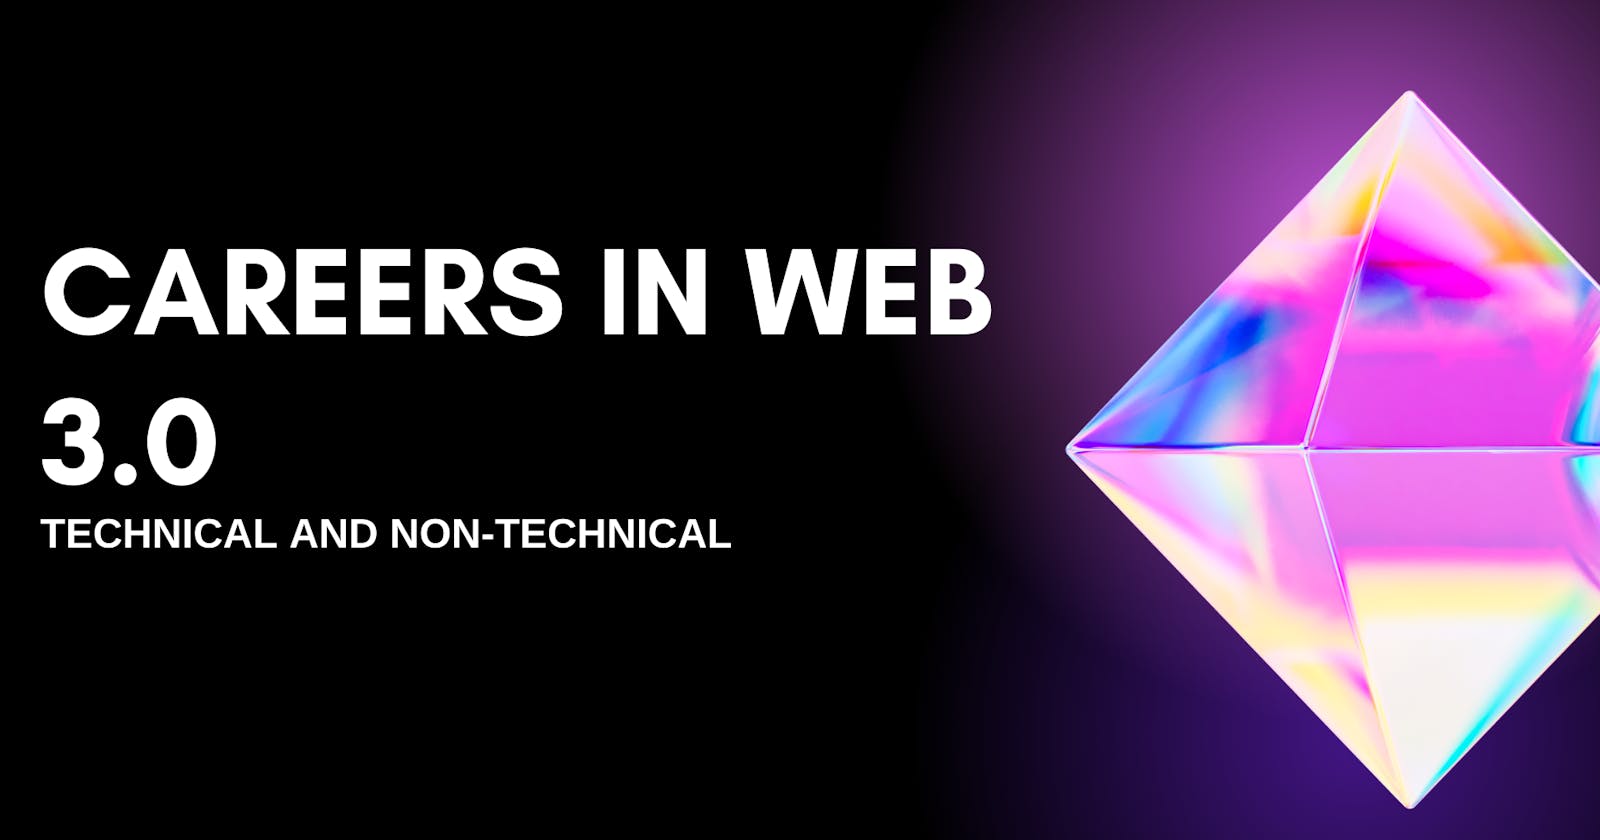 Careers In Web 3: Technical And Non-technical.